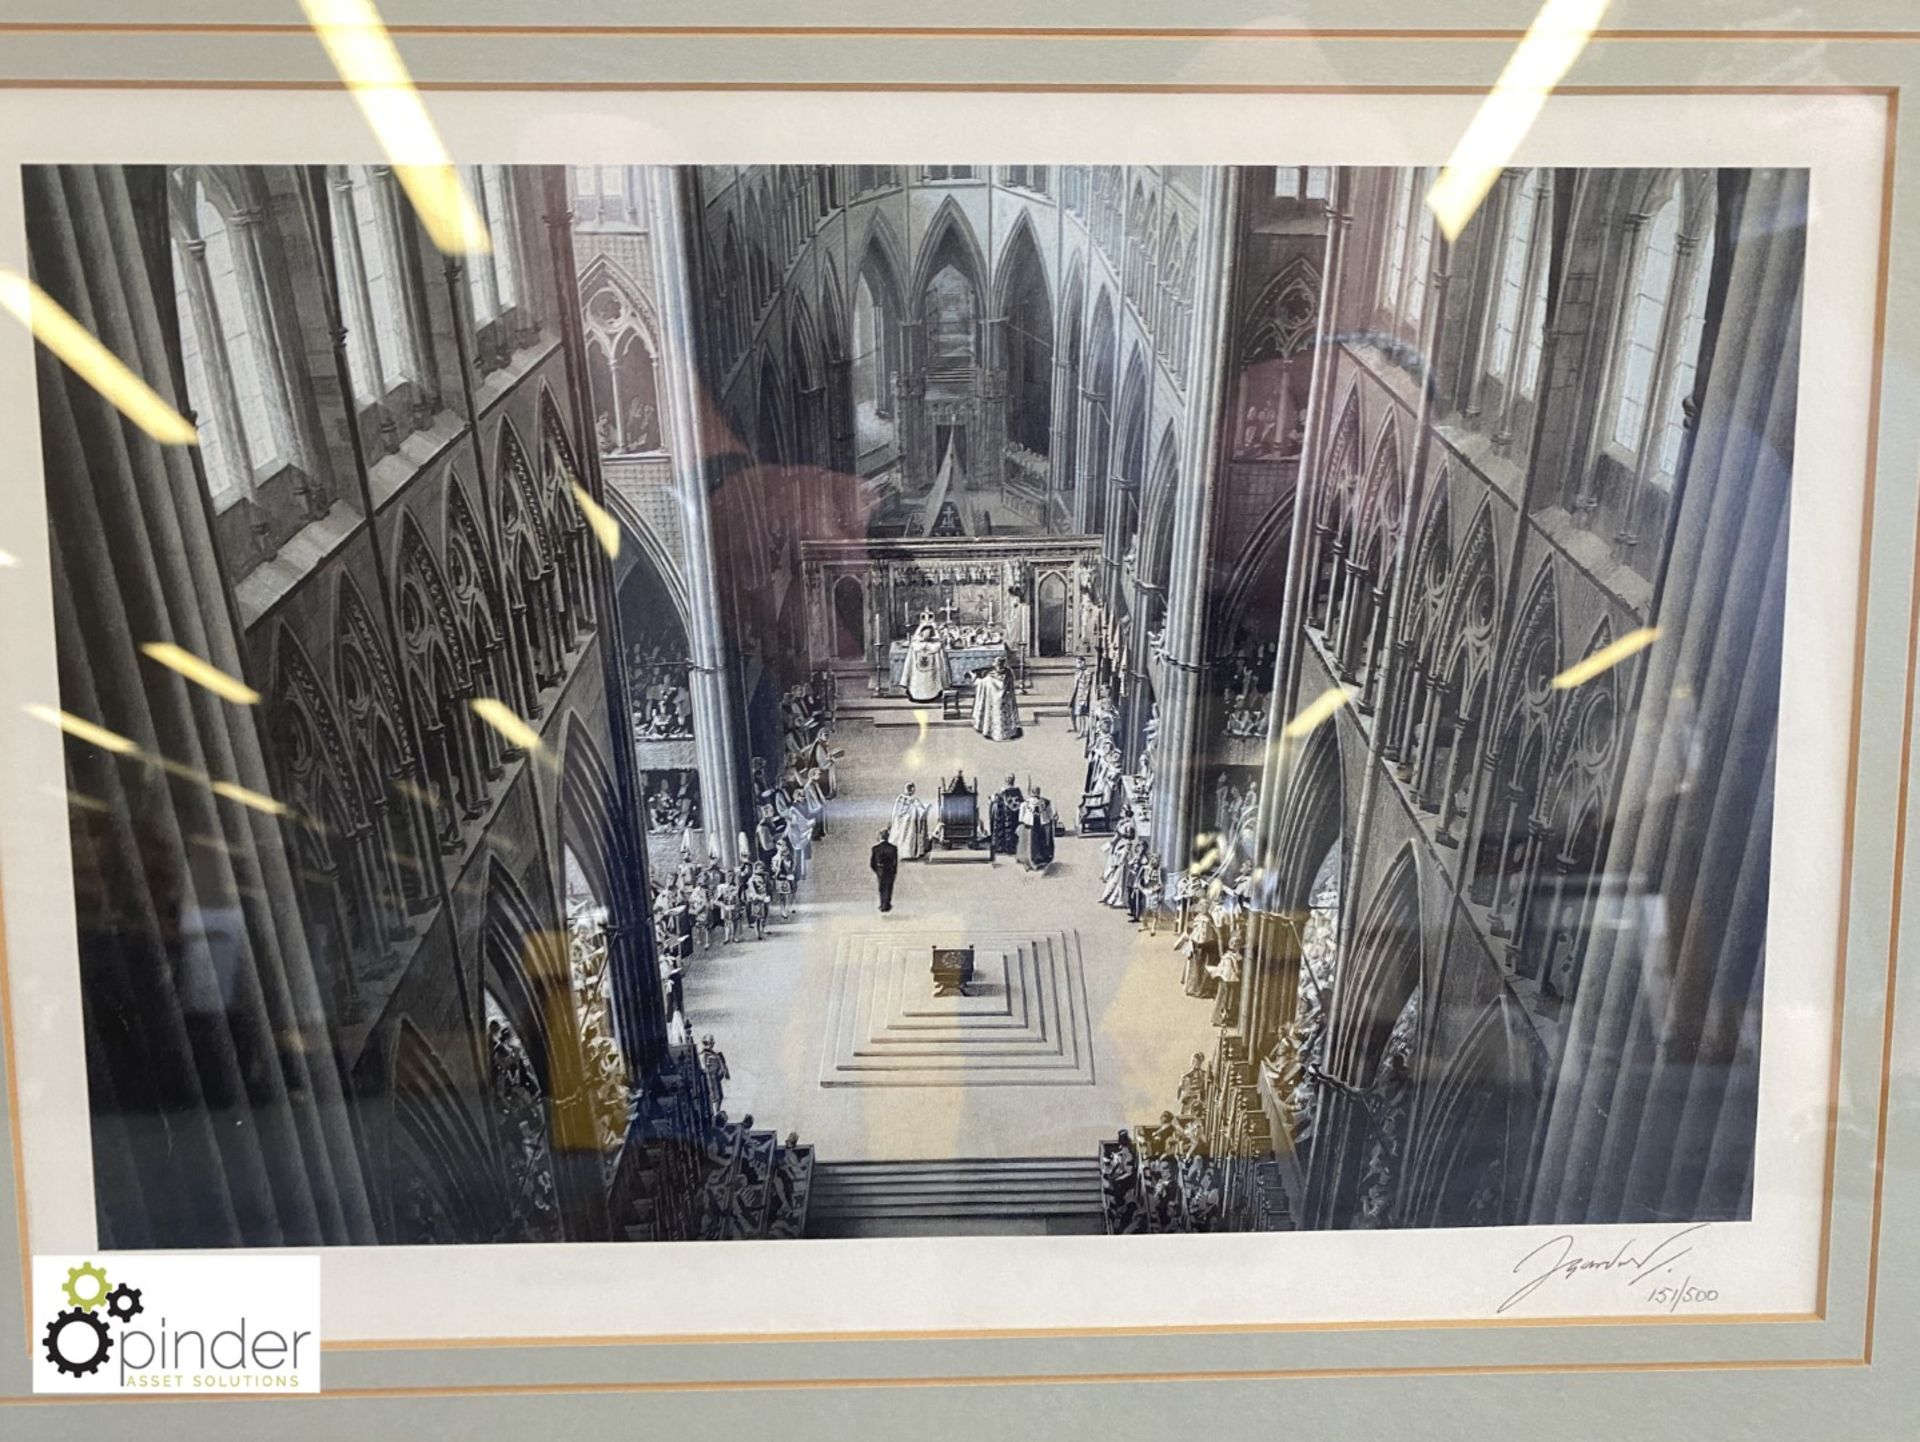 Framed and glazed signed limited edition Print of the Coronation of Elizabeth II, by James Gardener, - Image 2 of 3